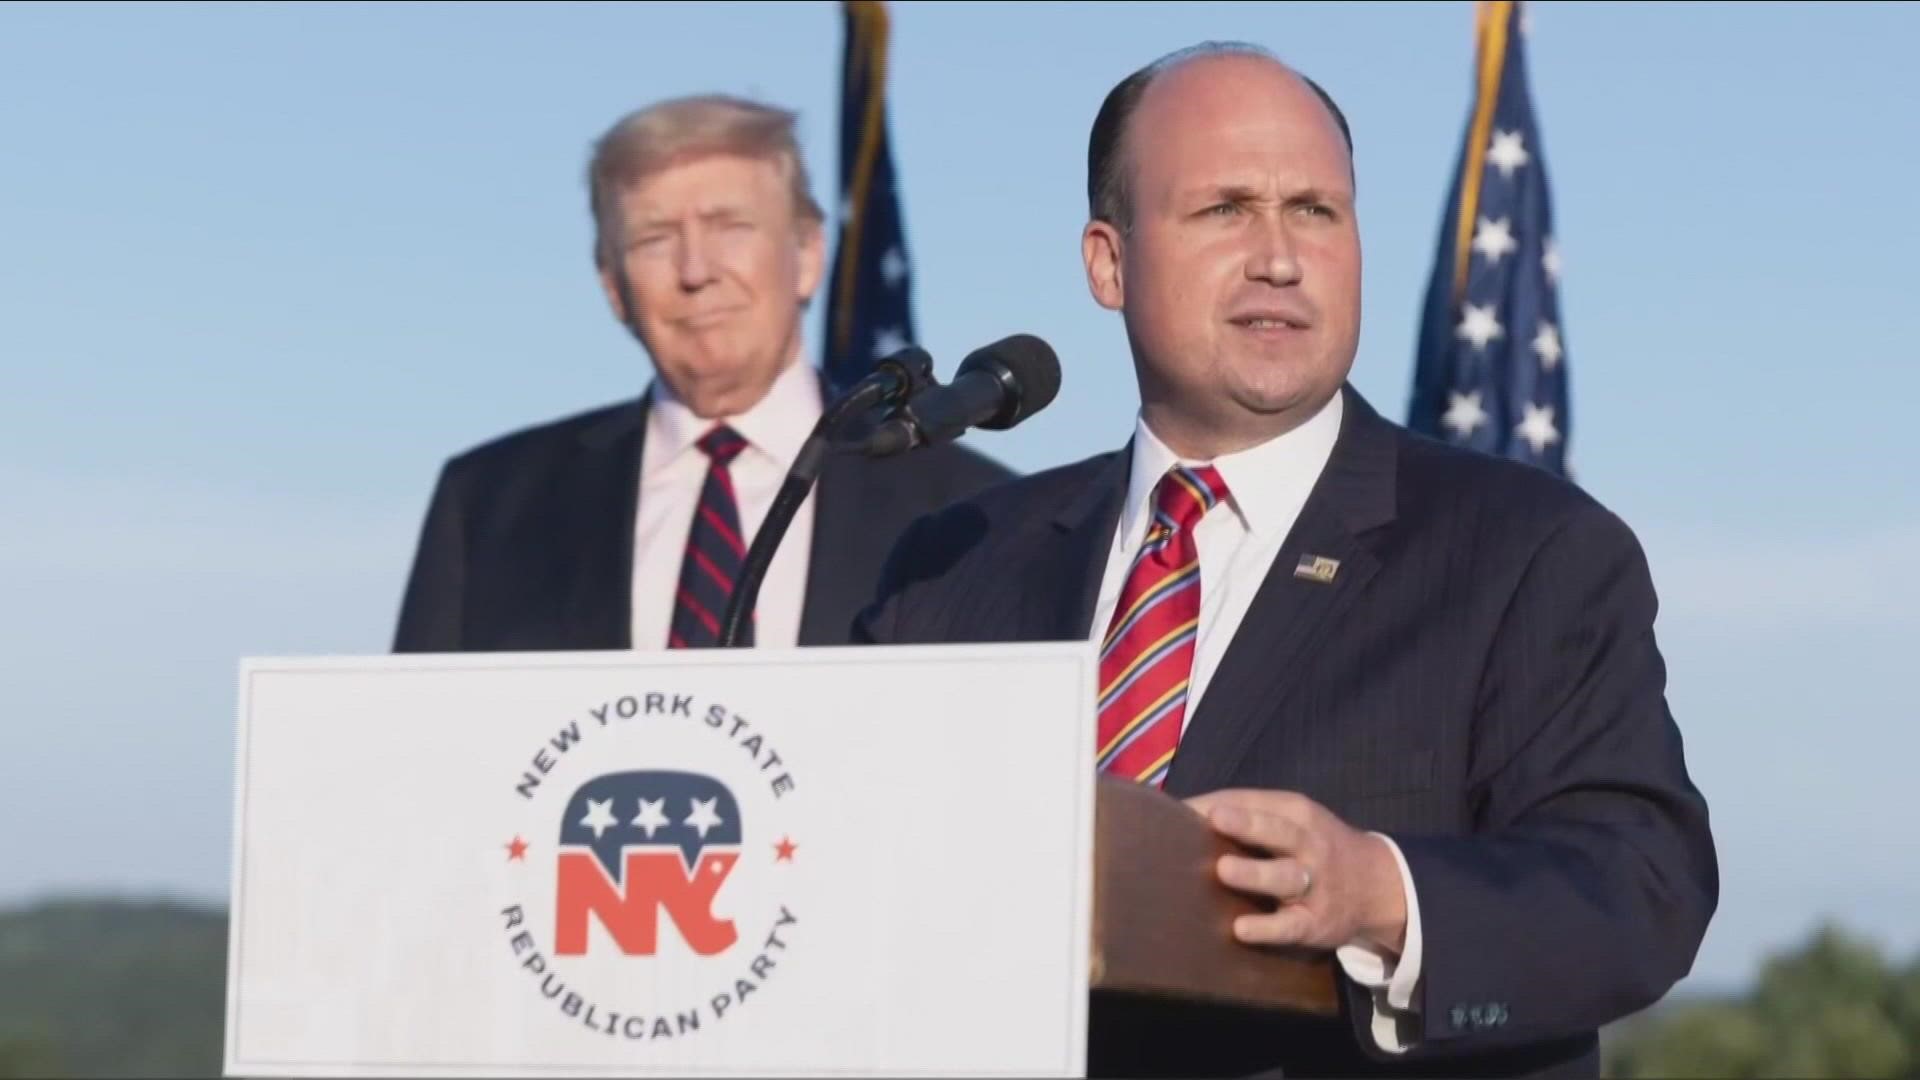 Former President Donald Trump says Langworthy is a "strong conservative warrior".